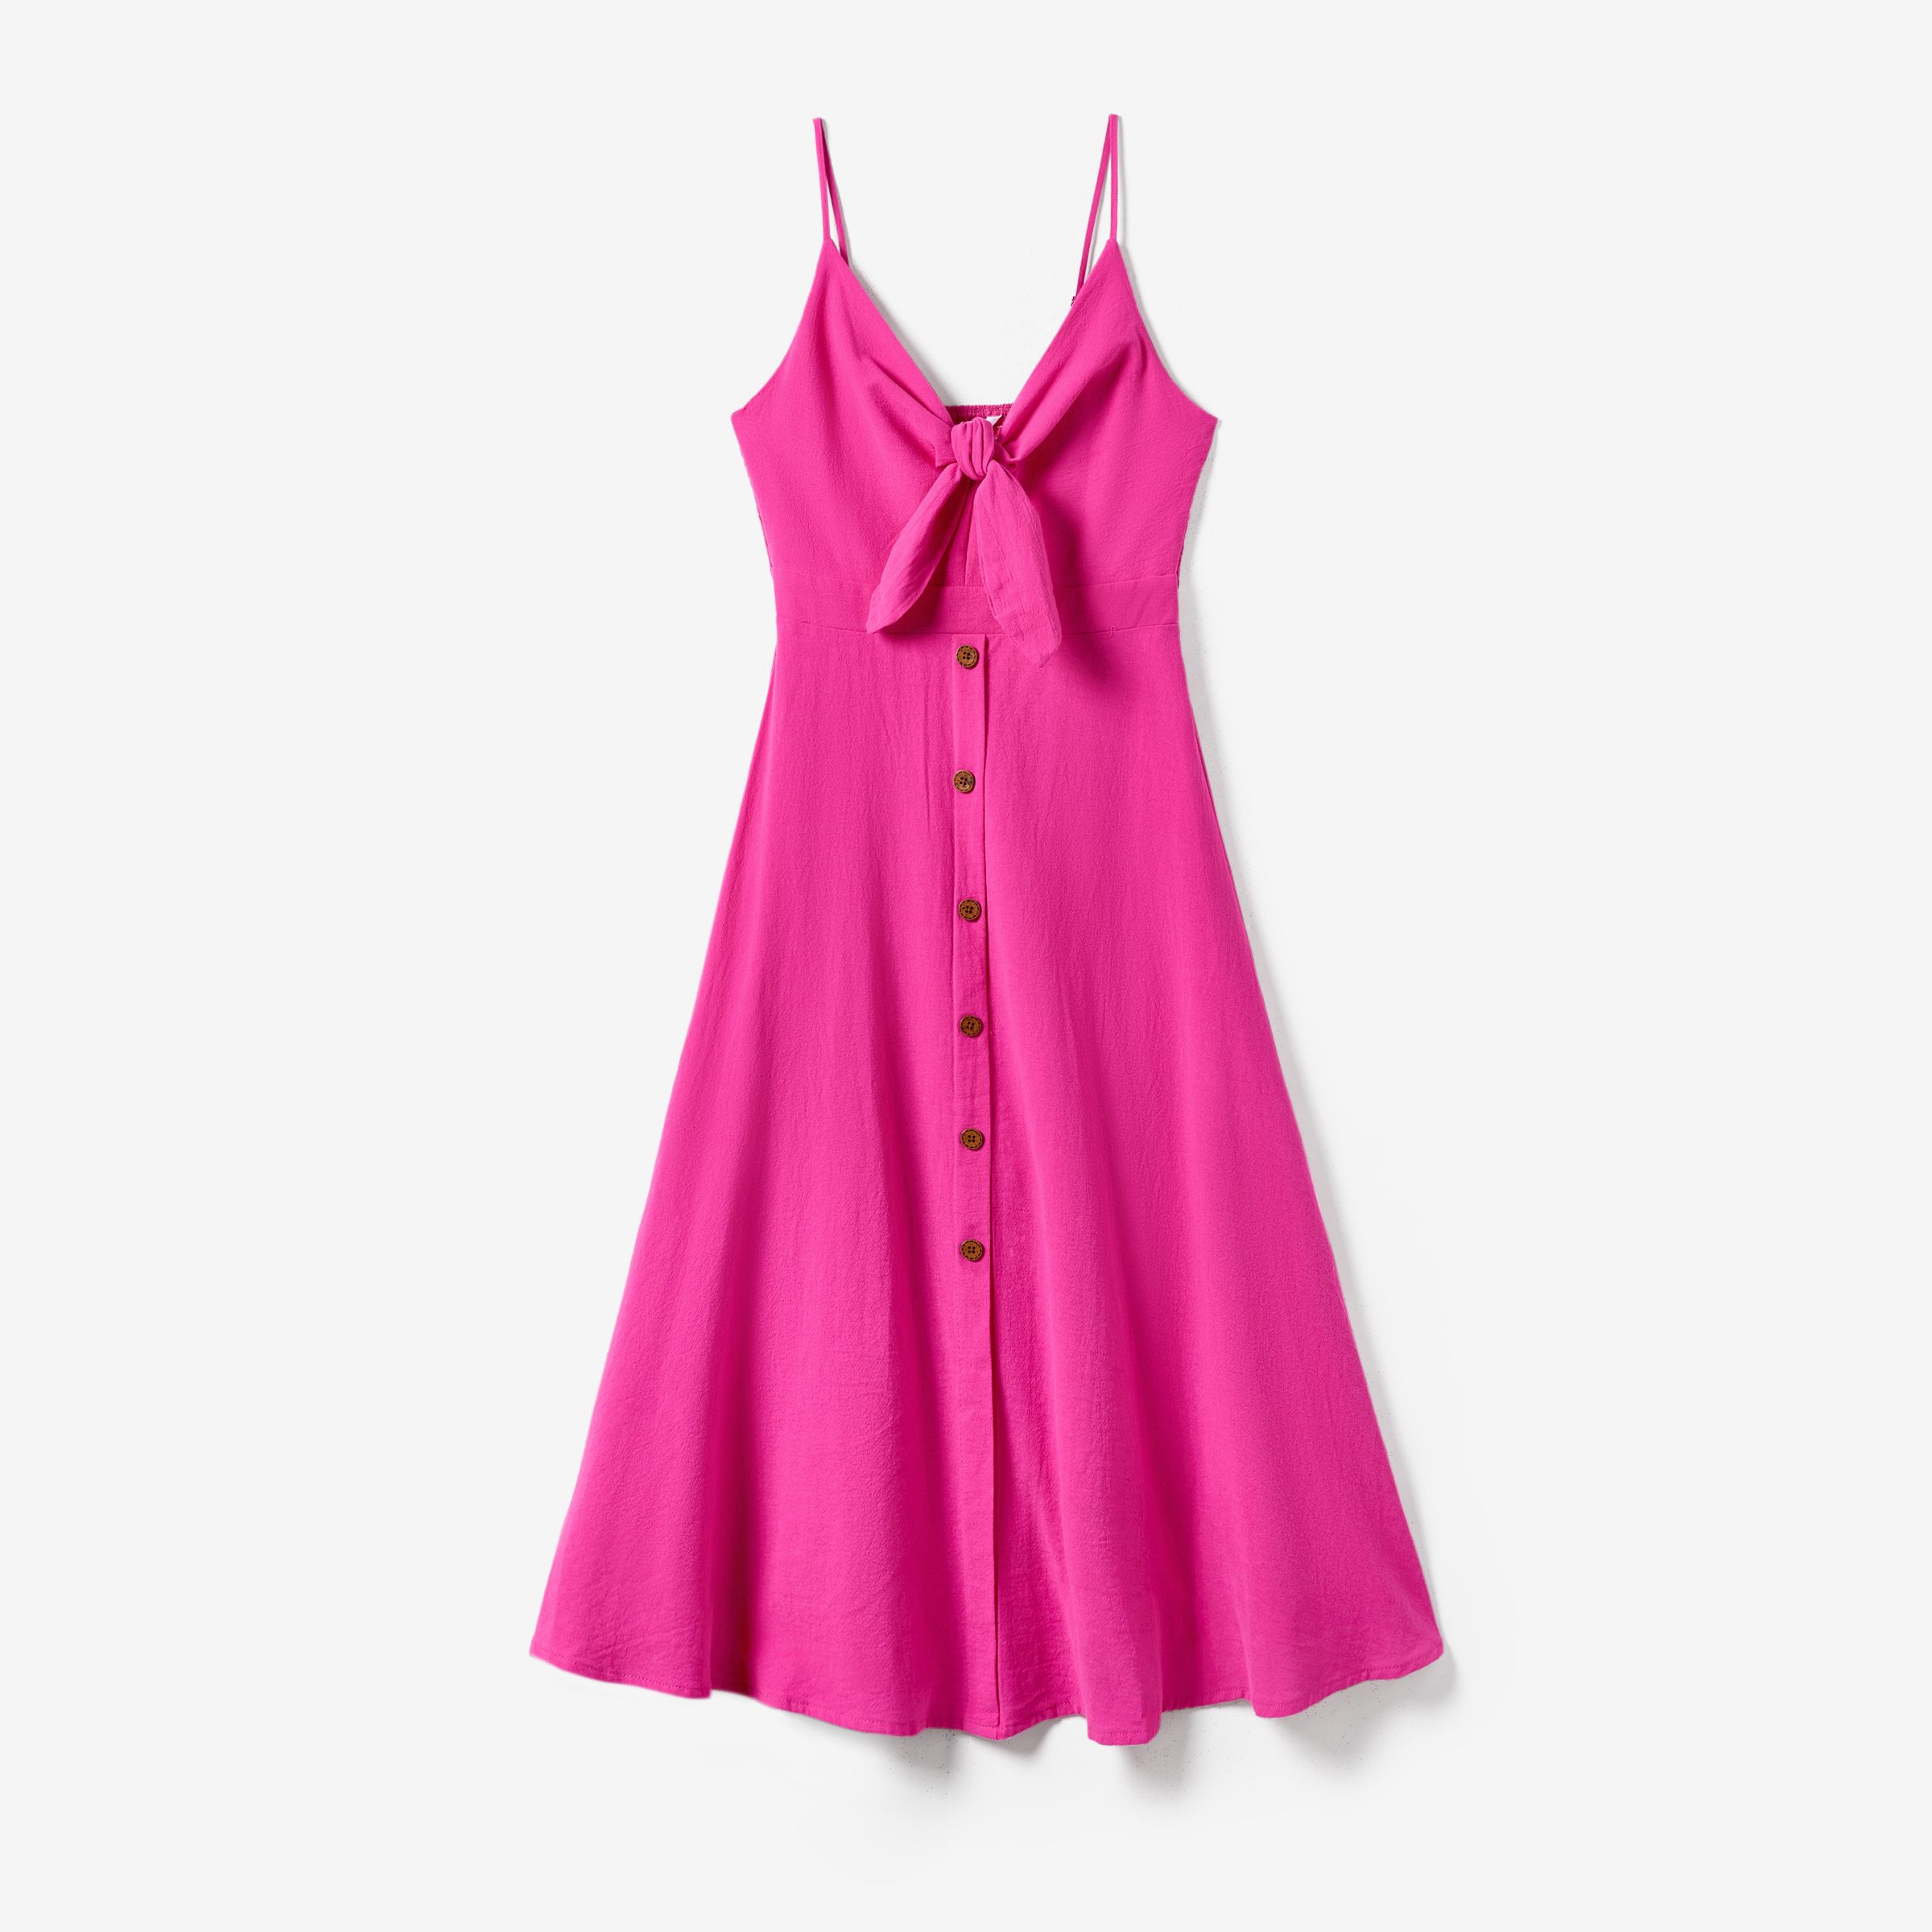 Family Matching Colorblock T-shirt And Hot Pink Button Neck-Tie Strap Dress Sets